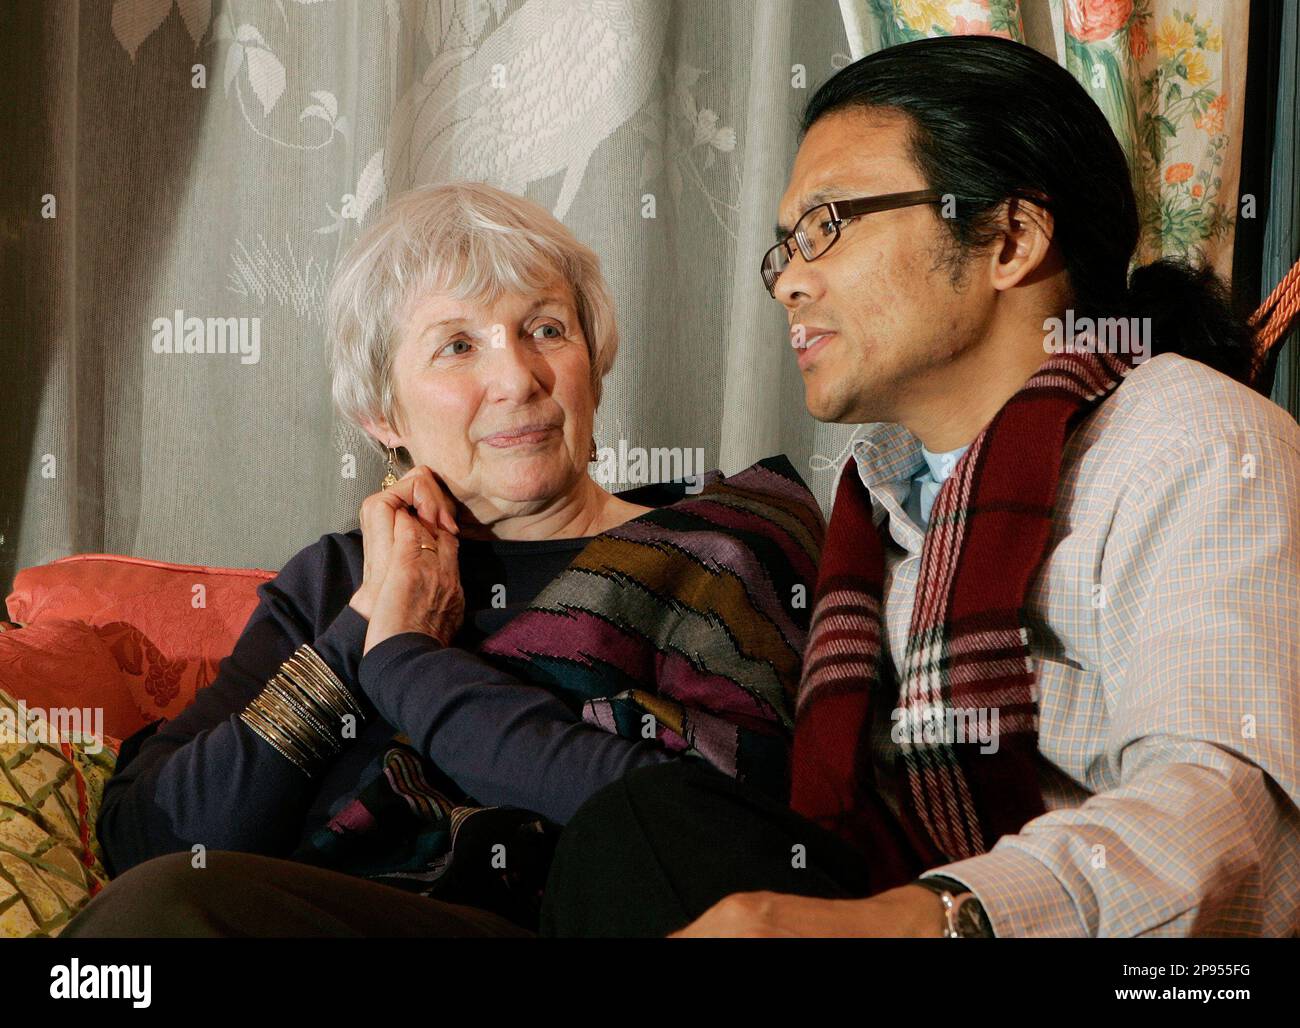 ADVANCE FOR FRIDAY, FEB. 13** Margaret Carne looks at husband Pradeep Thapa  as they sit together in their home in Jersey City, N.J., Sunday Jan. 11,  2009, talking about how they became